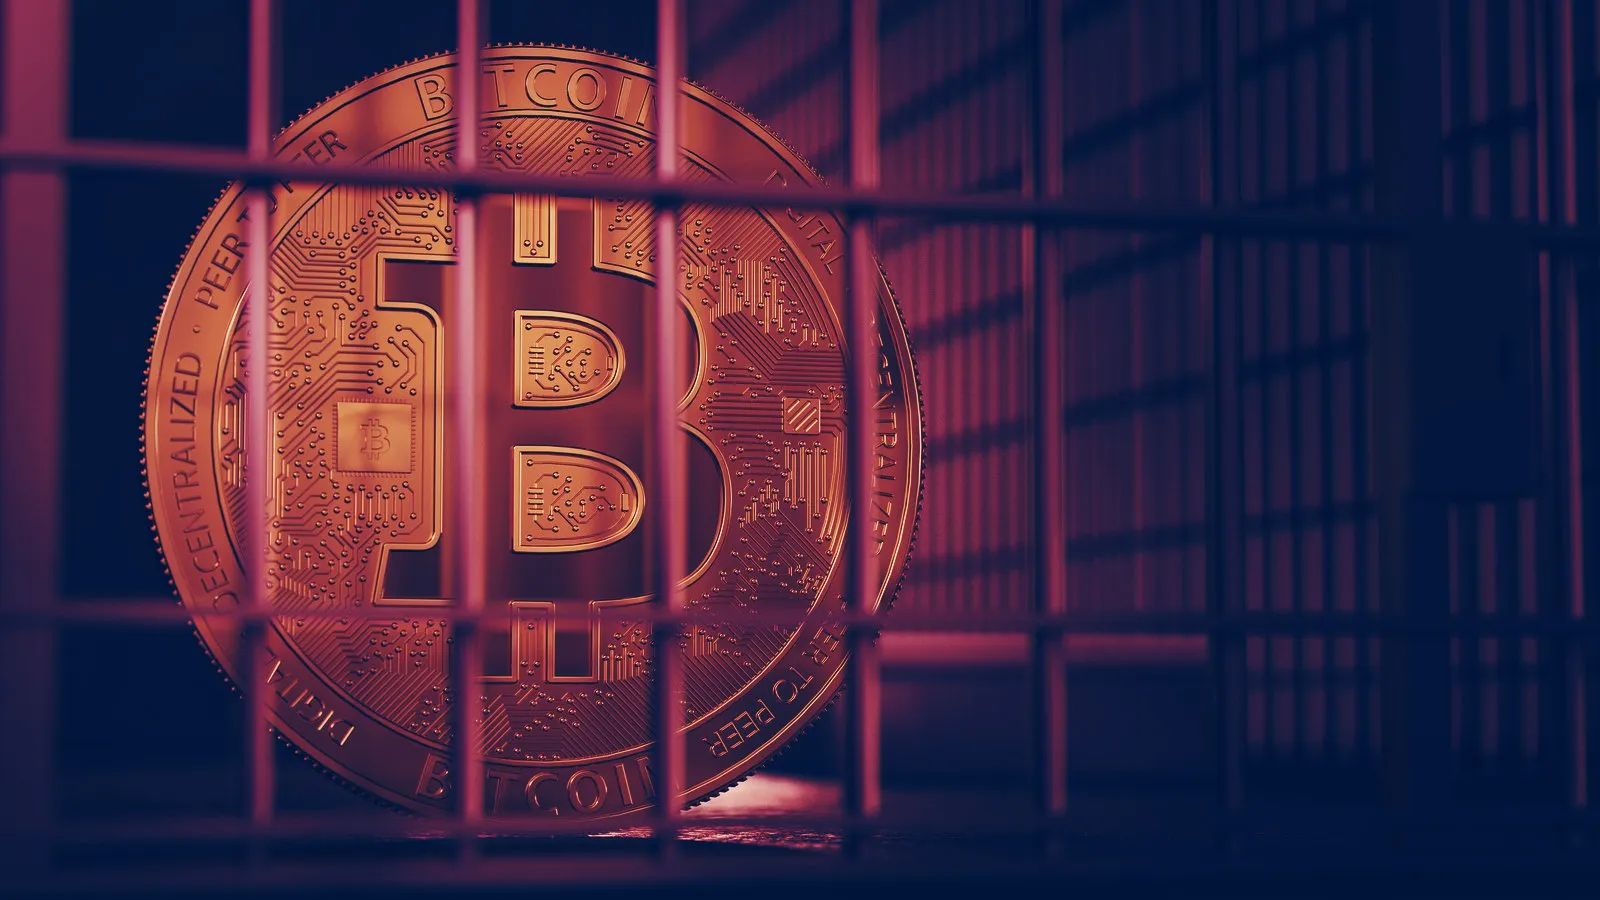 Holding crypto could lead to prison time. Image: Shutterstock